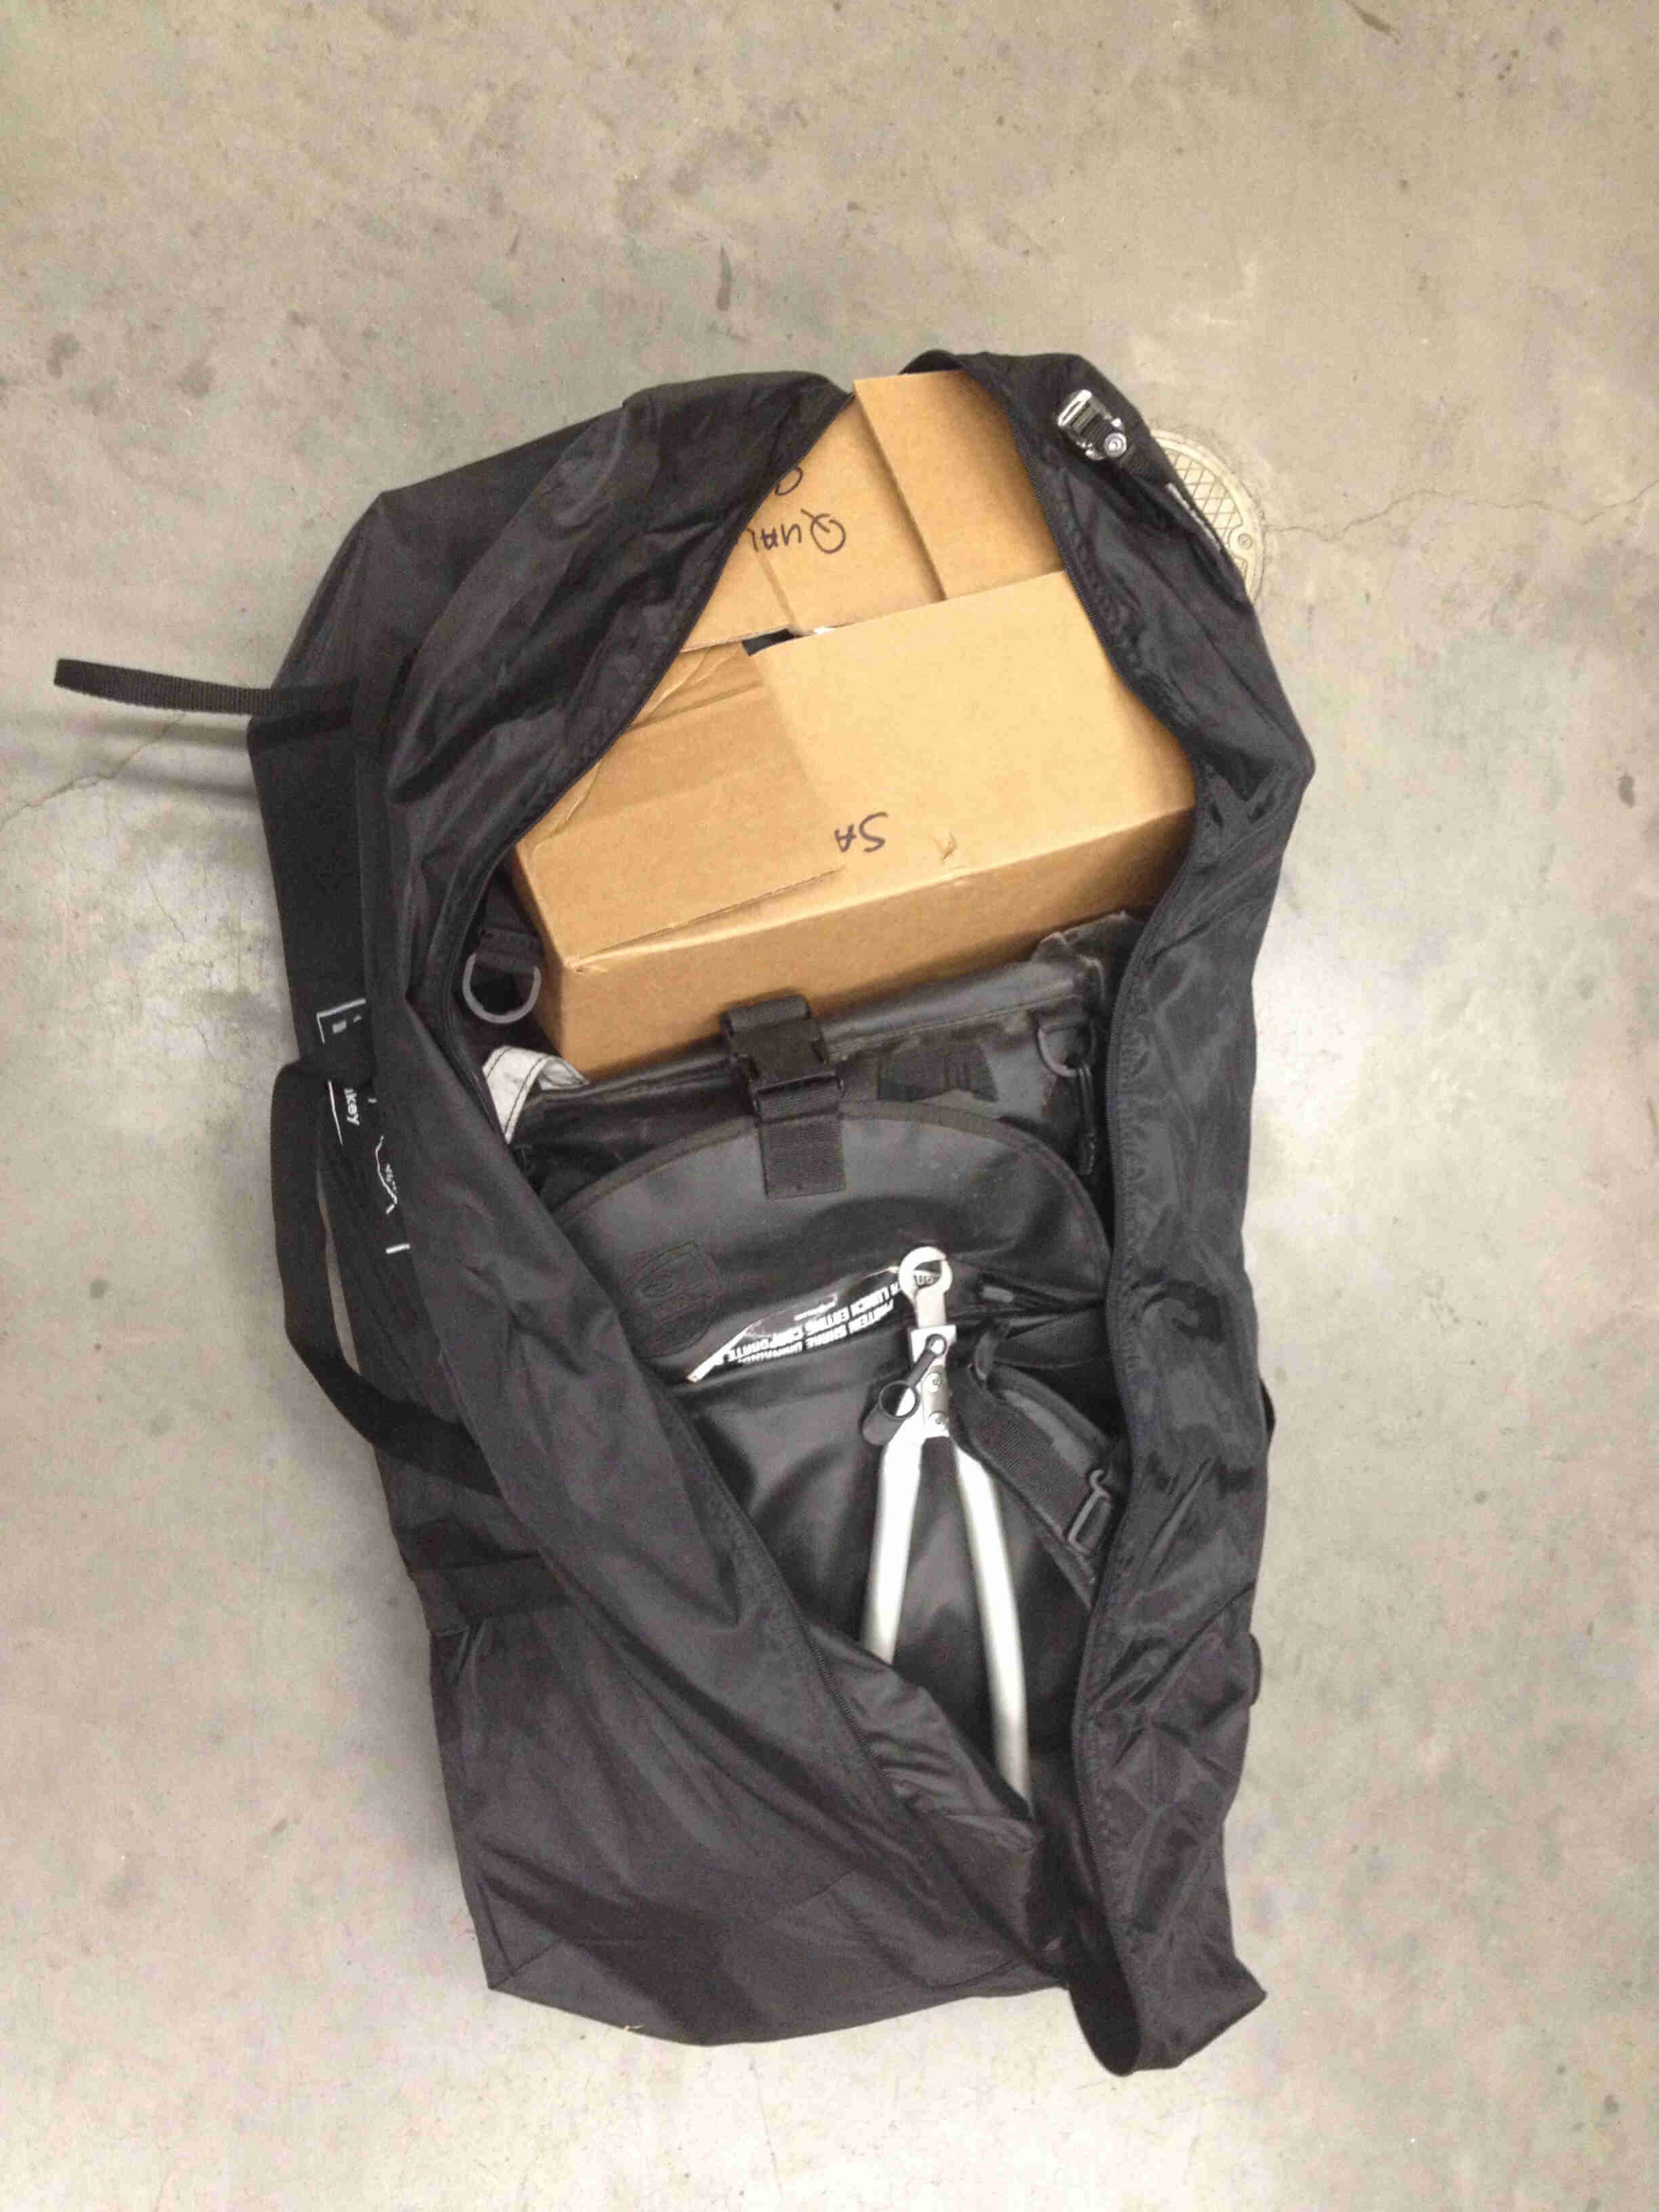 Downward view of an unzipped, black gear bag with a cardboard box and other items in it, on a cement floor